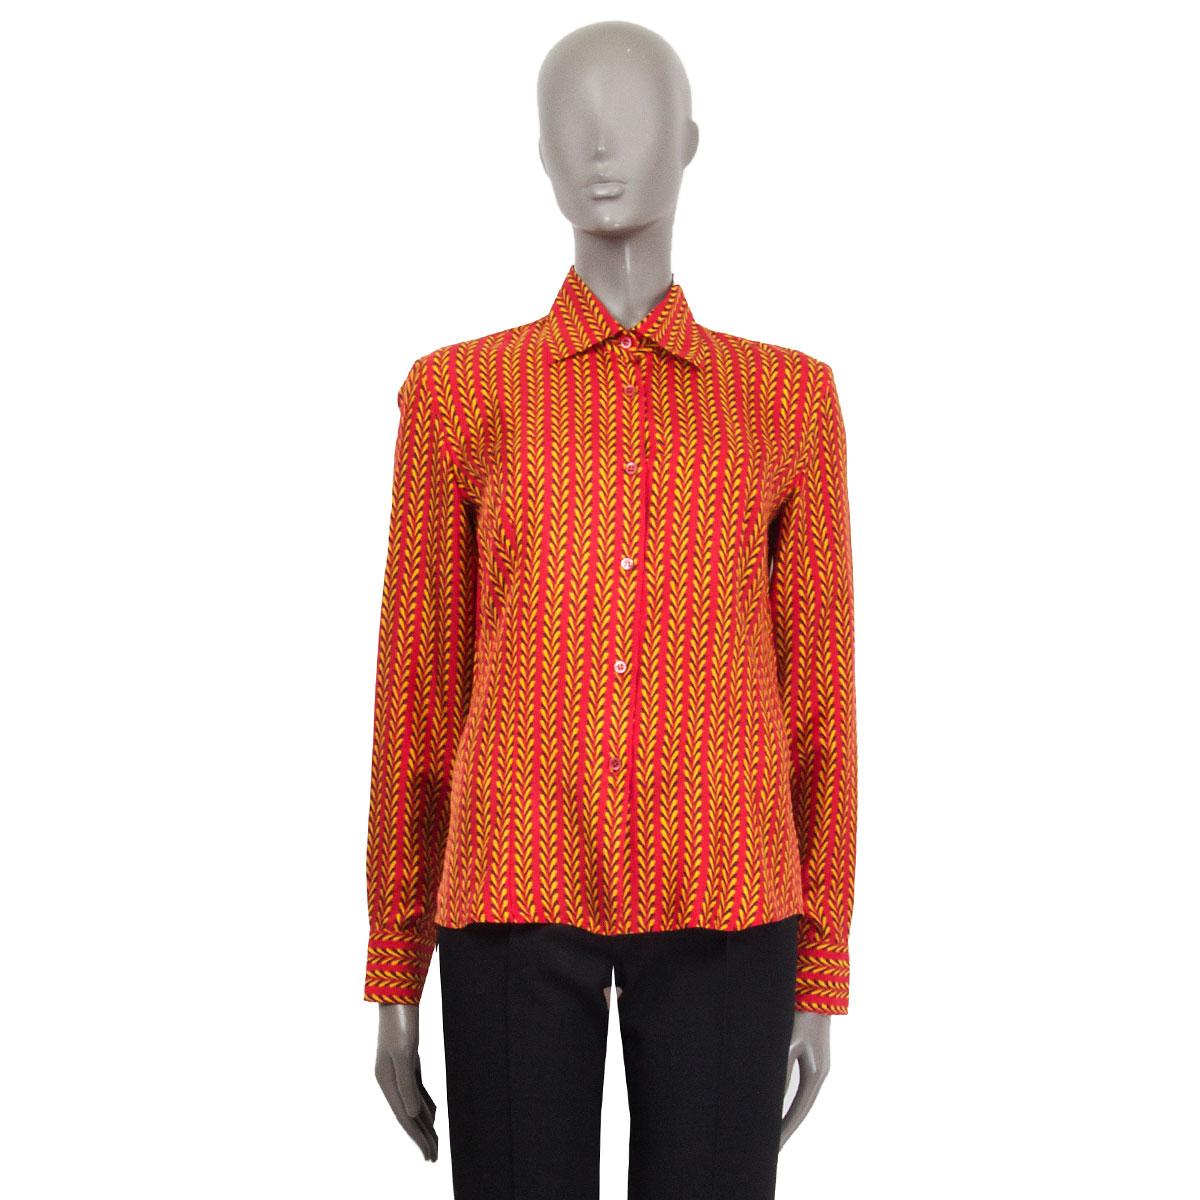 100% authentic Prada 'Holliday & Brown London' re-edited printed shirt in red, yellow and dark brown silk (100%). Has been worn and is in excellent condition. 

Tag Size 40
Size S
Shoulder Width 43cm (16.8in)
Bust 94cm (36.7in)
Waist 87cm